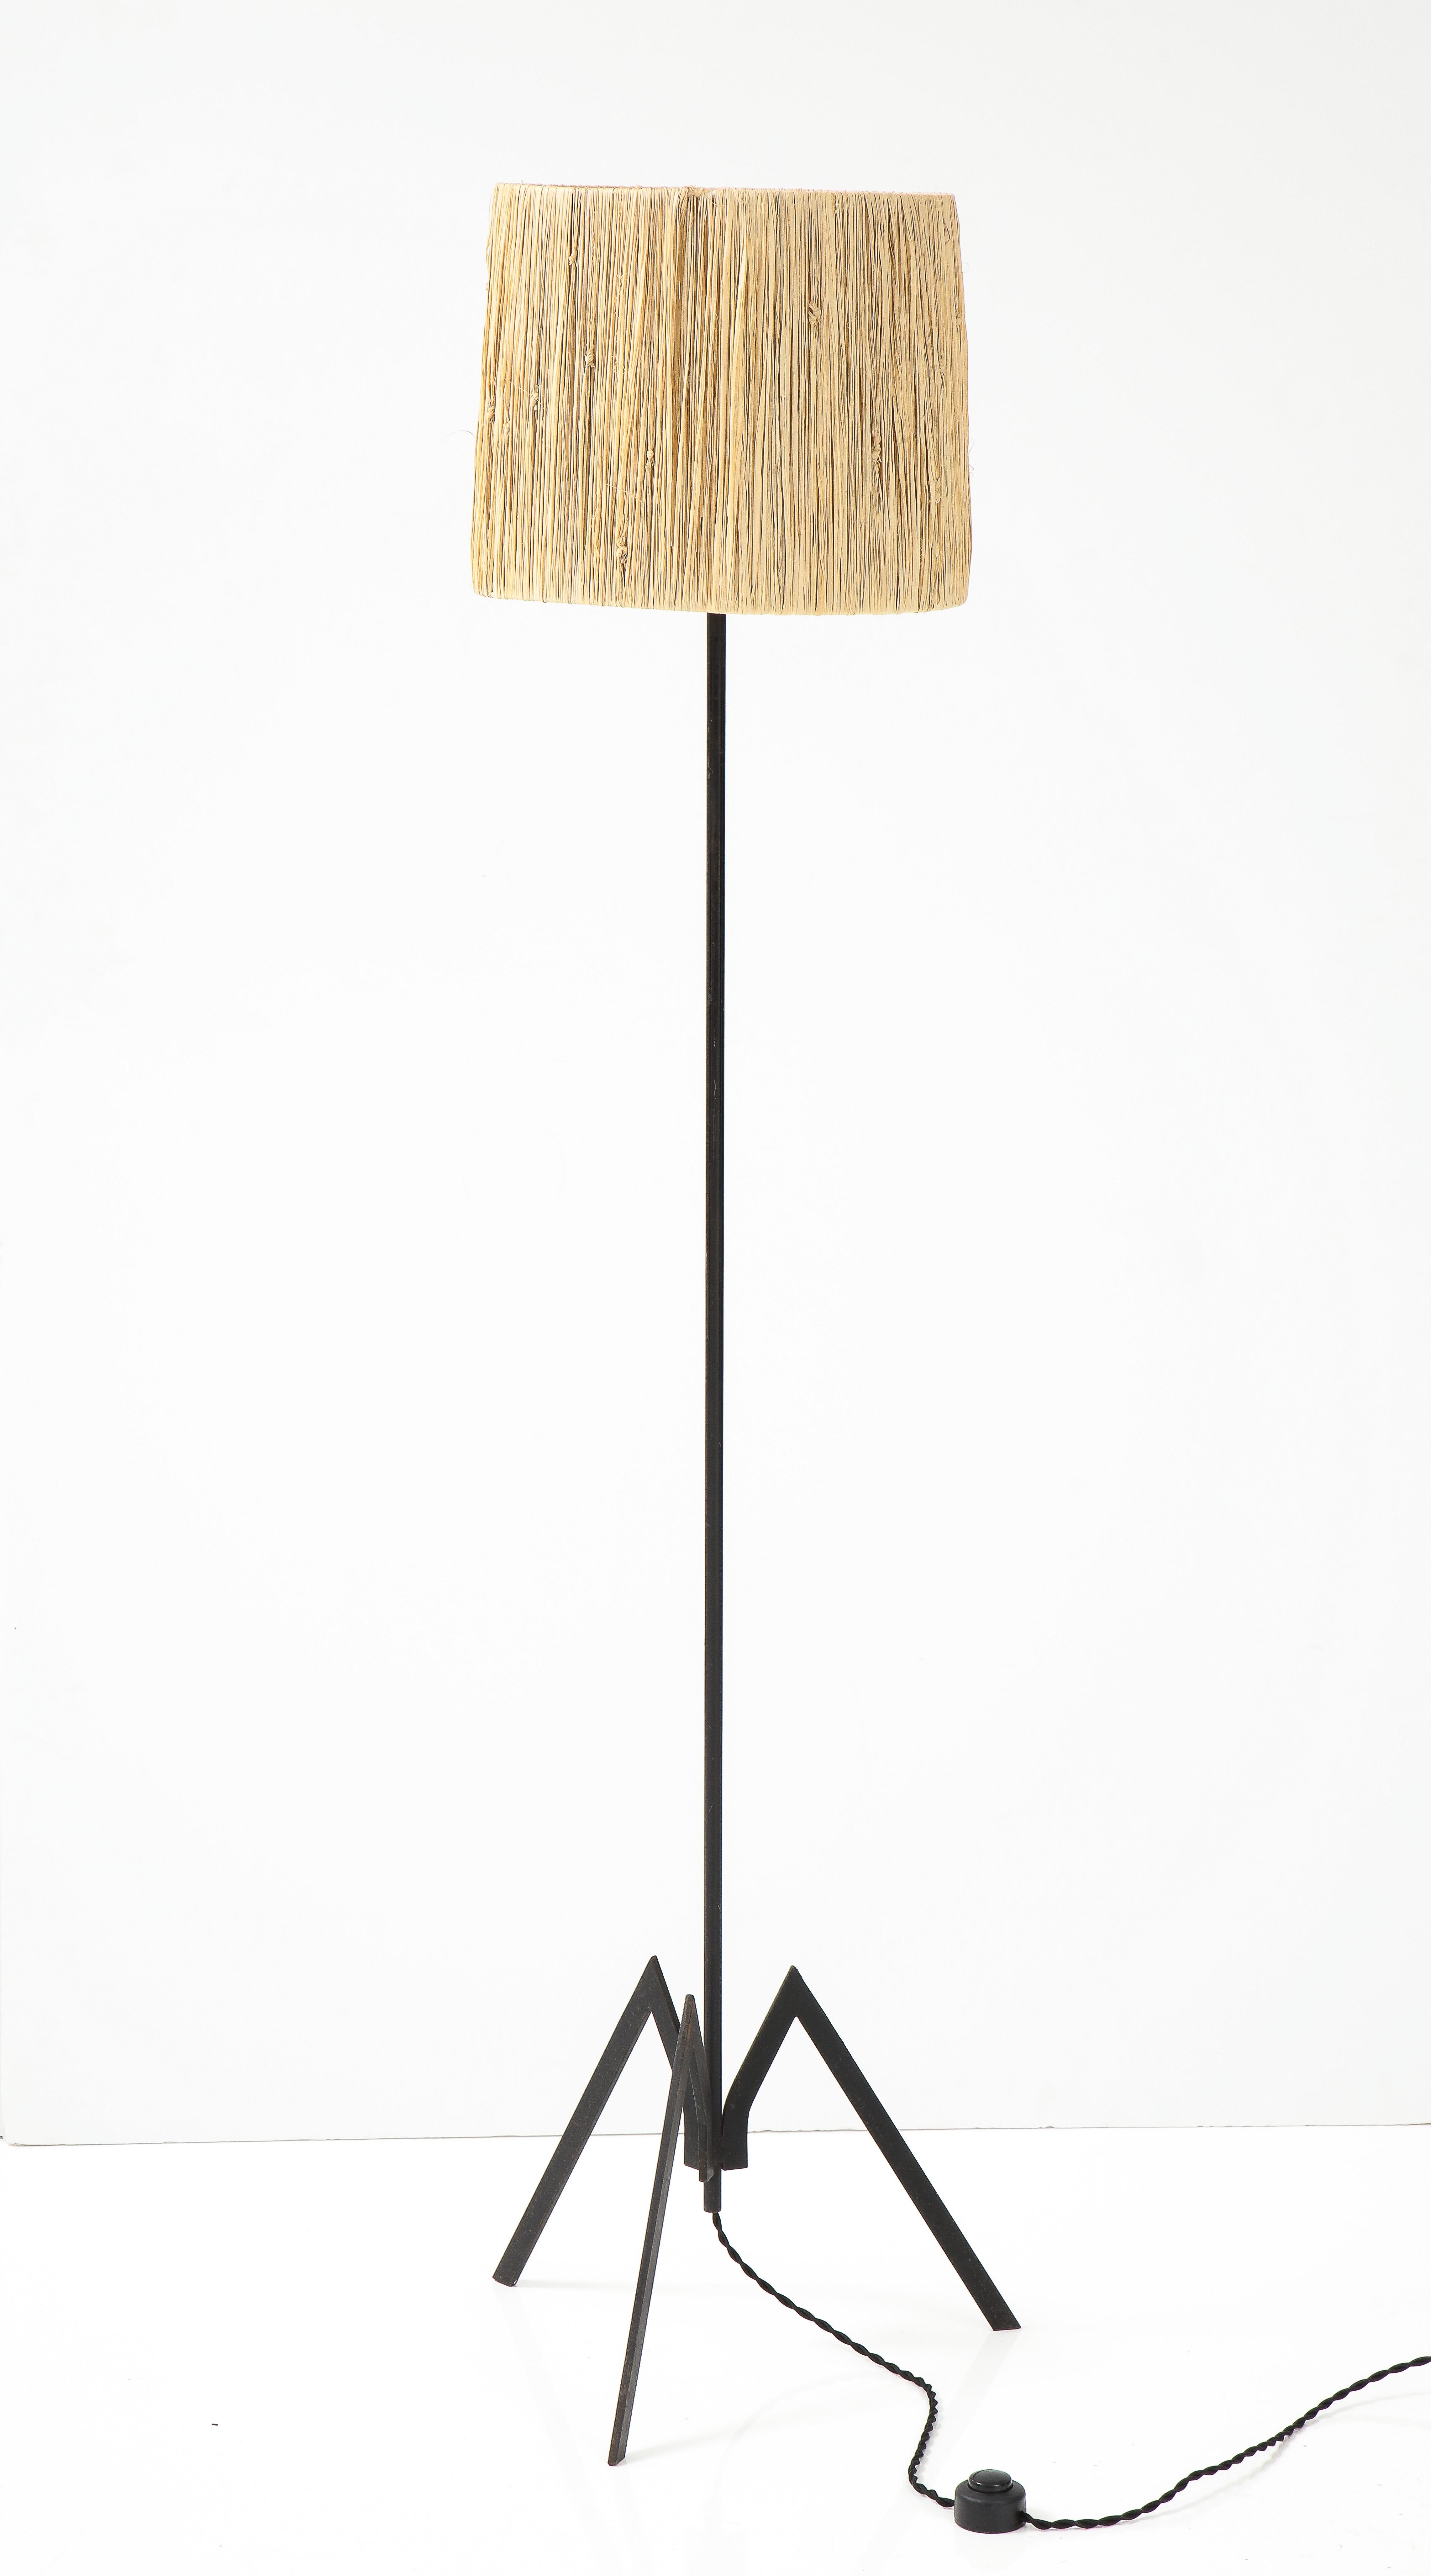 French Modernist Iron Floor Lamp with Raffia Shade, France, c. 1950's 4